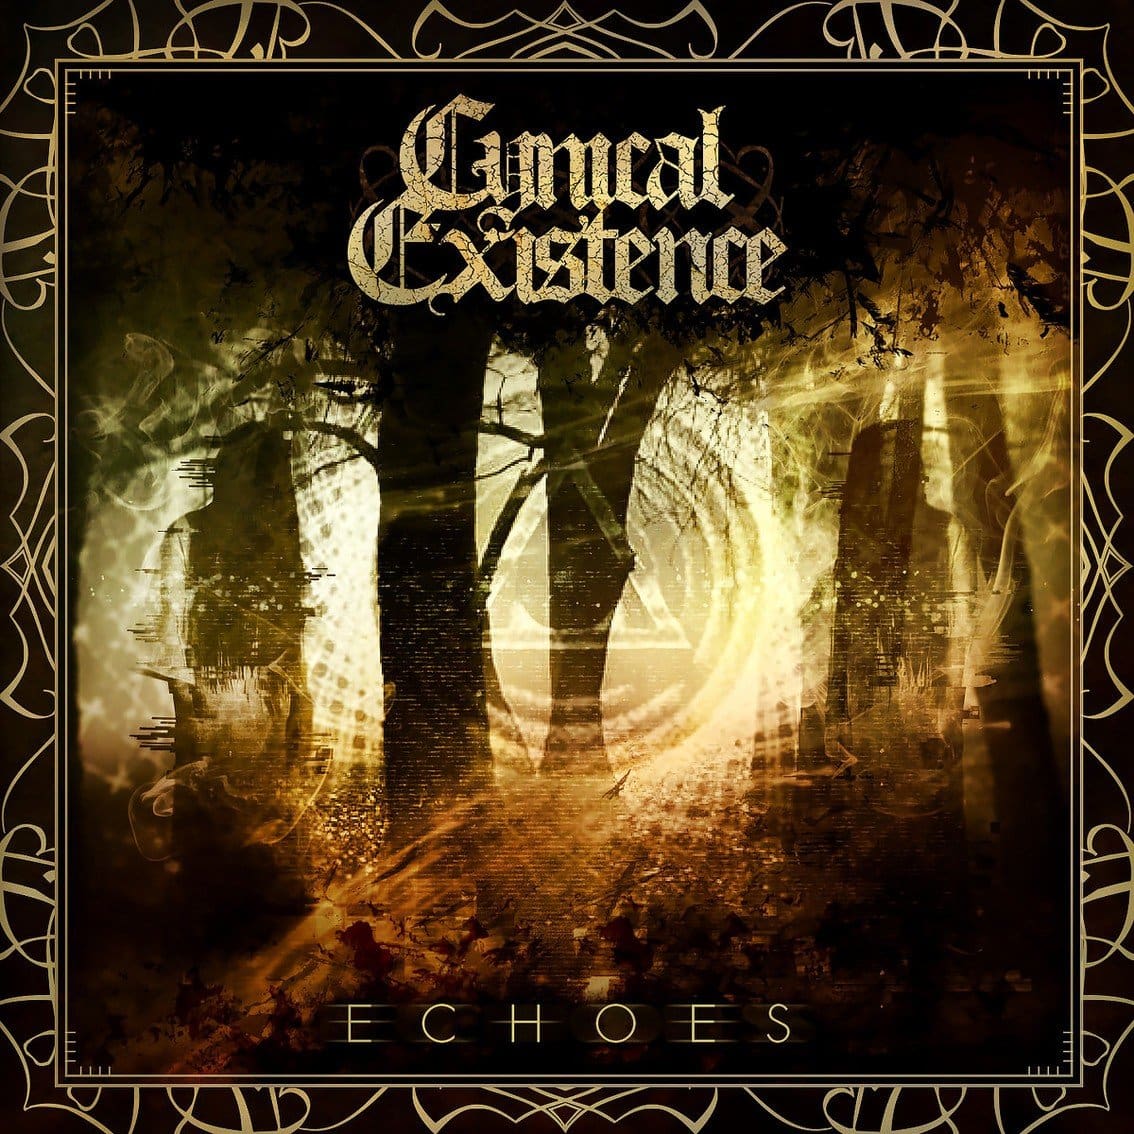 Cynical Existence returns with brand new EP 'Echoes'